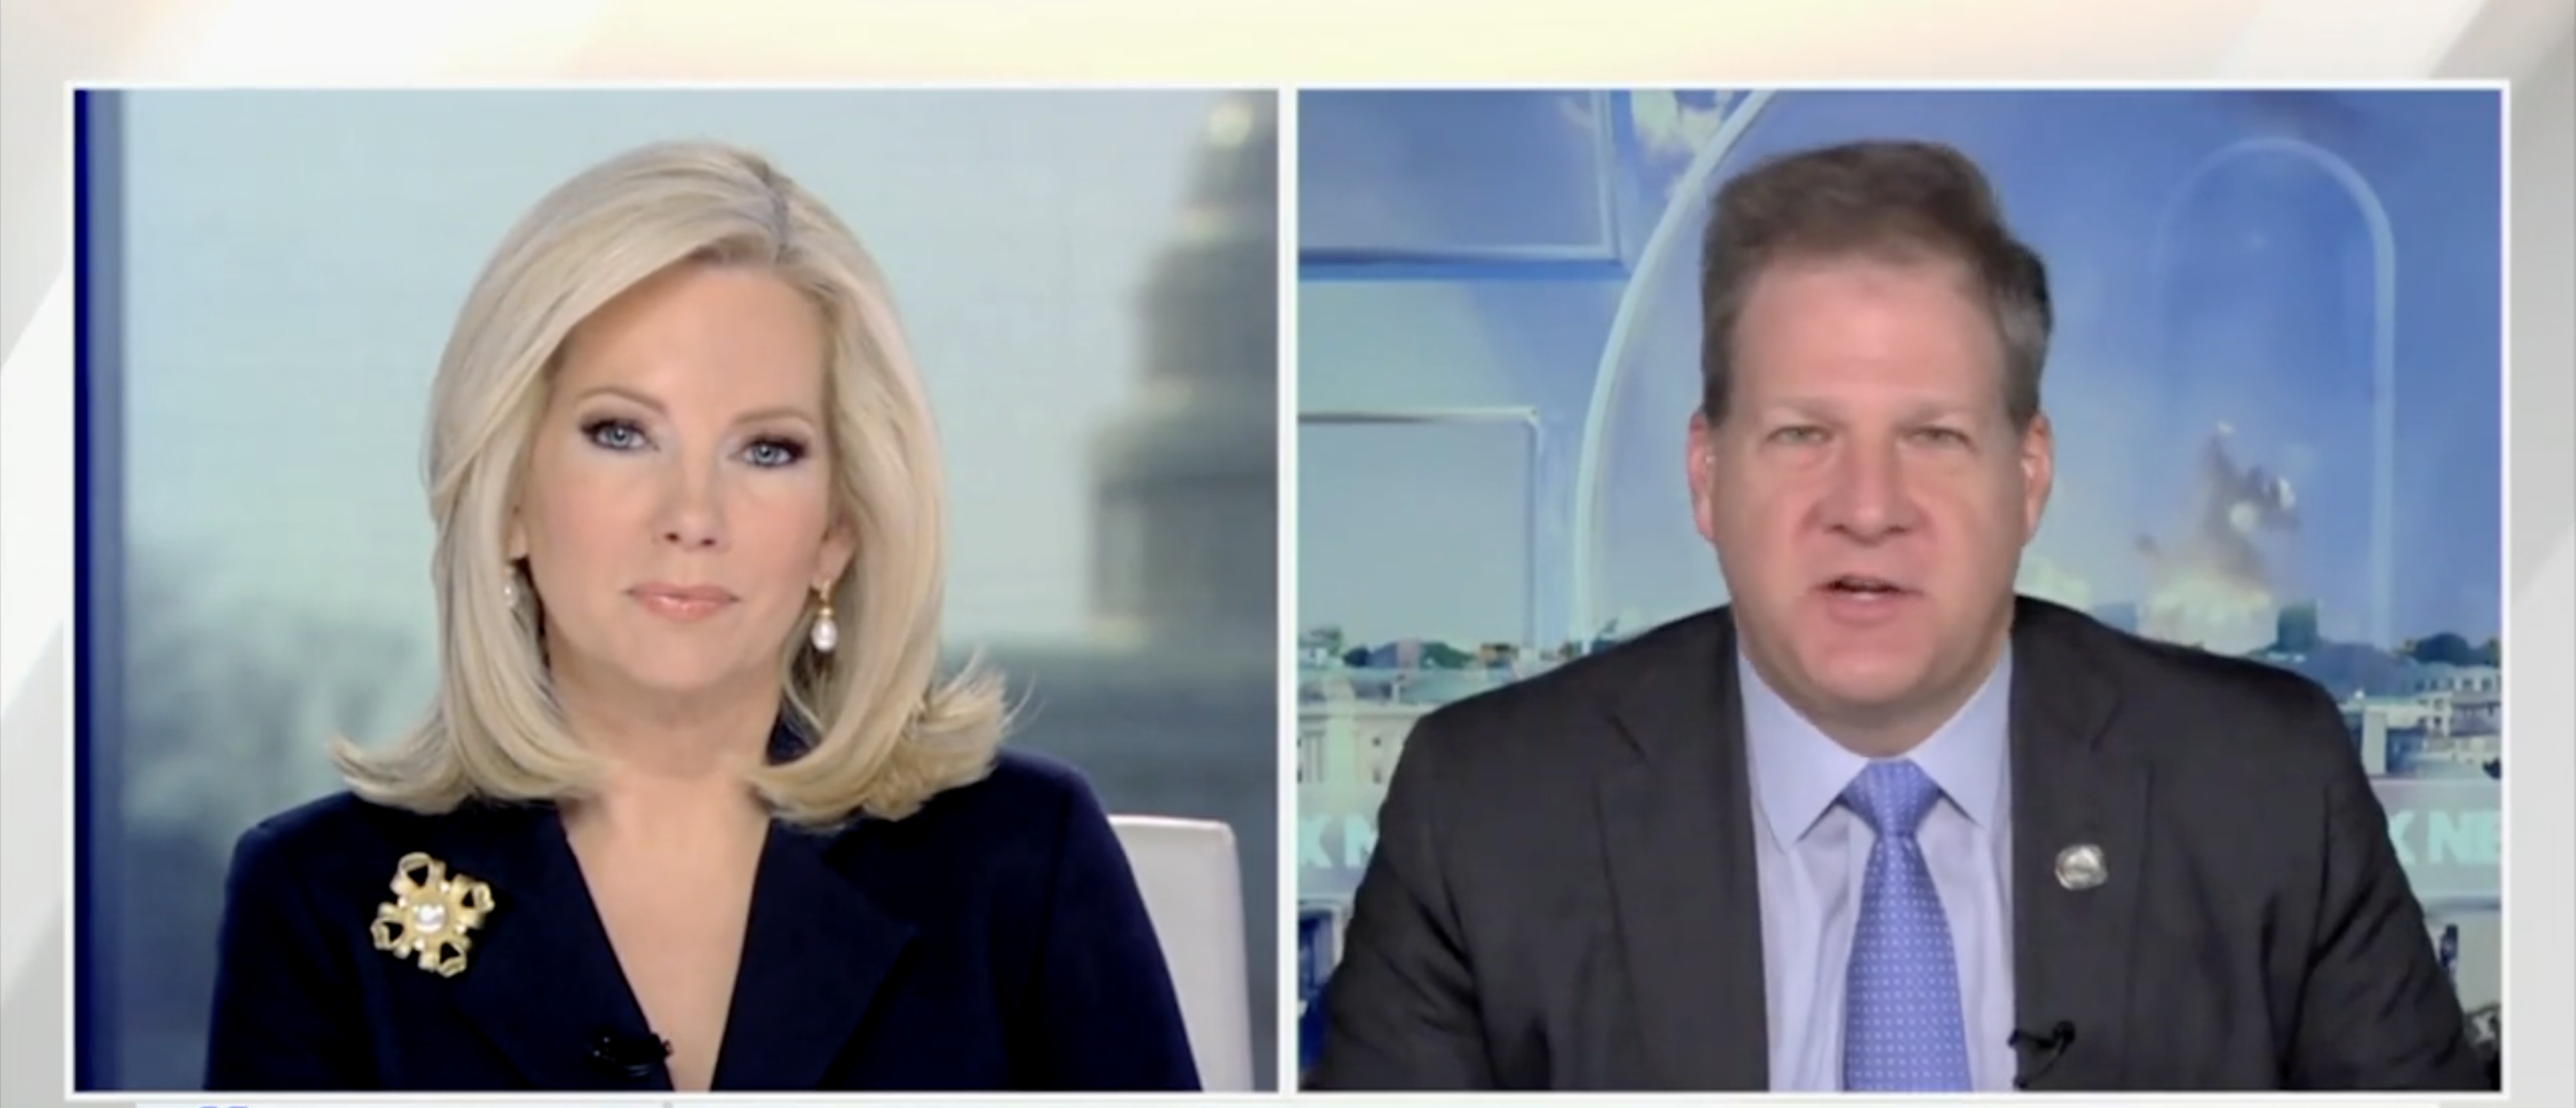 Fox Host Likens Sununu’s Support Of Haley To Helping Biden, Calls Out ‘Almost Zero Chance’ Of Her Winning Nomination